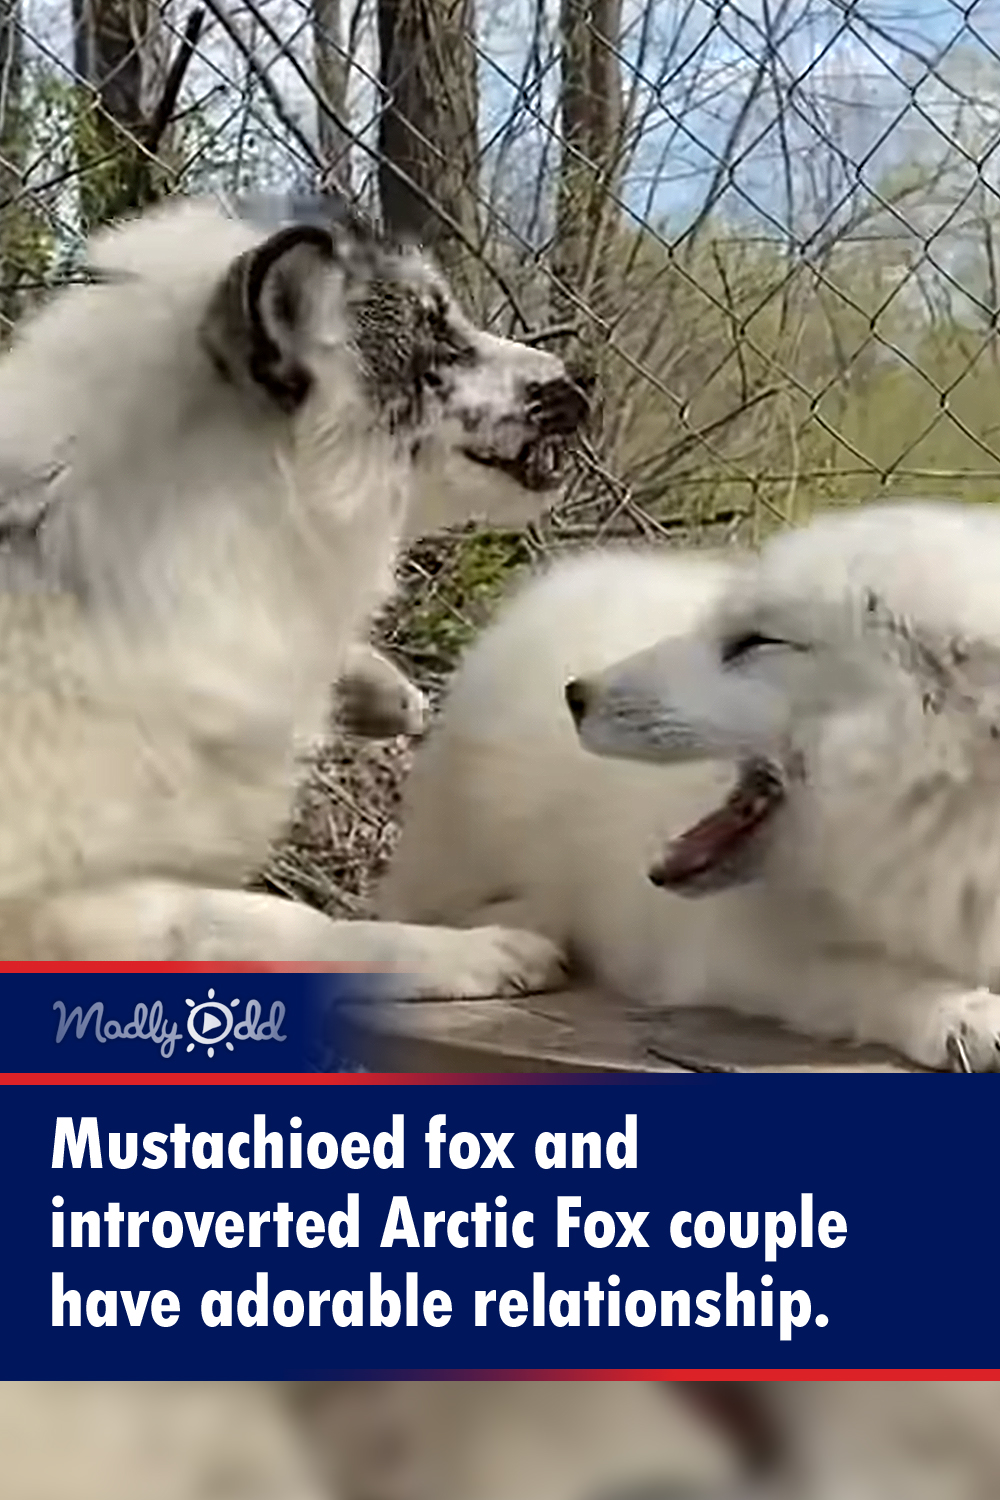 Mustachioed fox and introverted Arctic Fox couple have adorable relationship